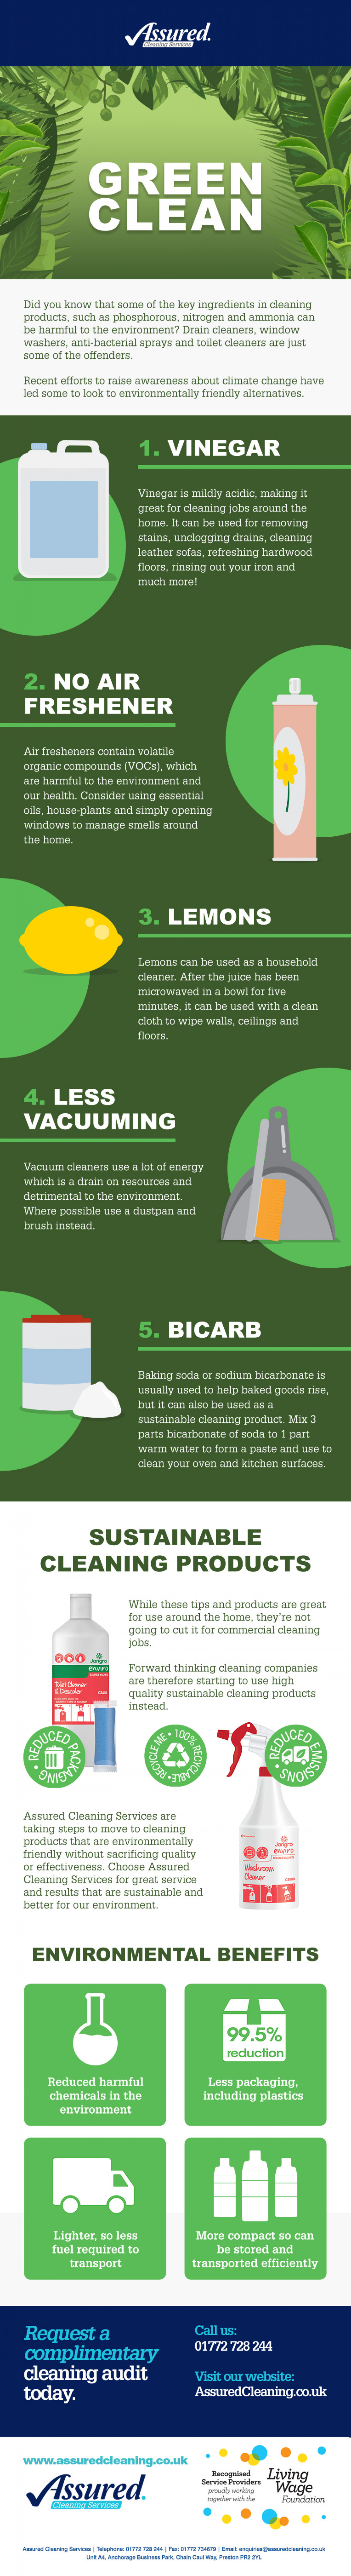 Green Clean Infographic